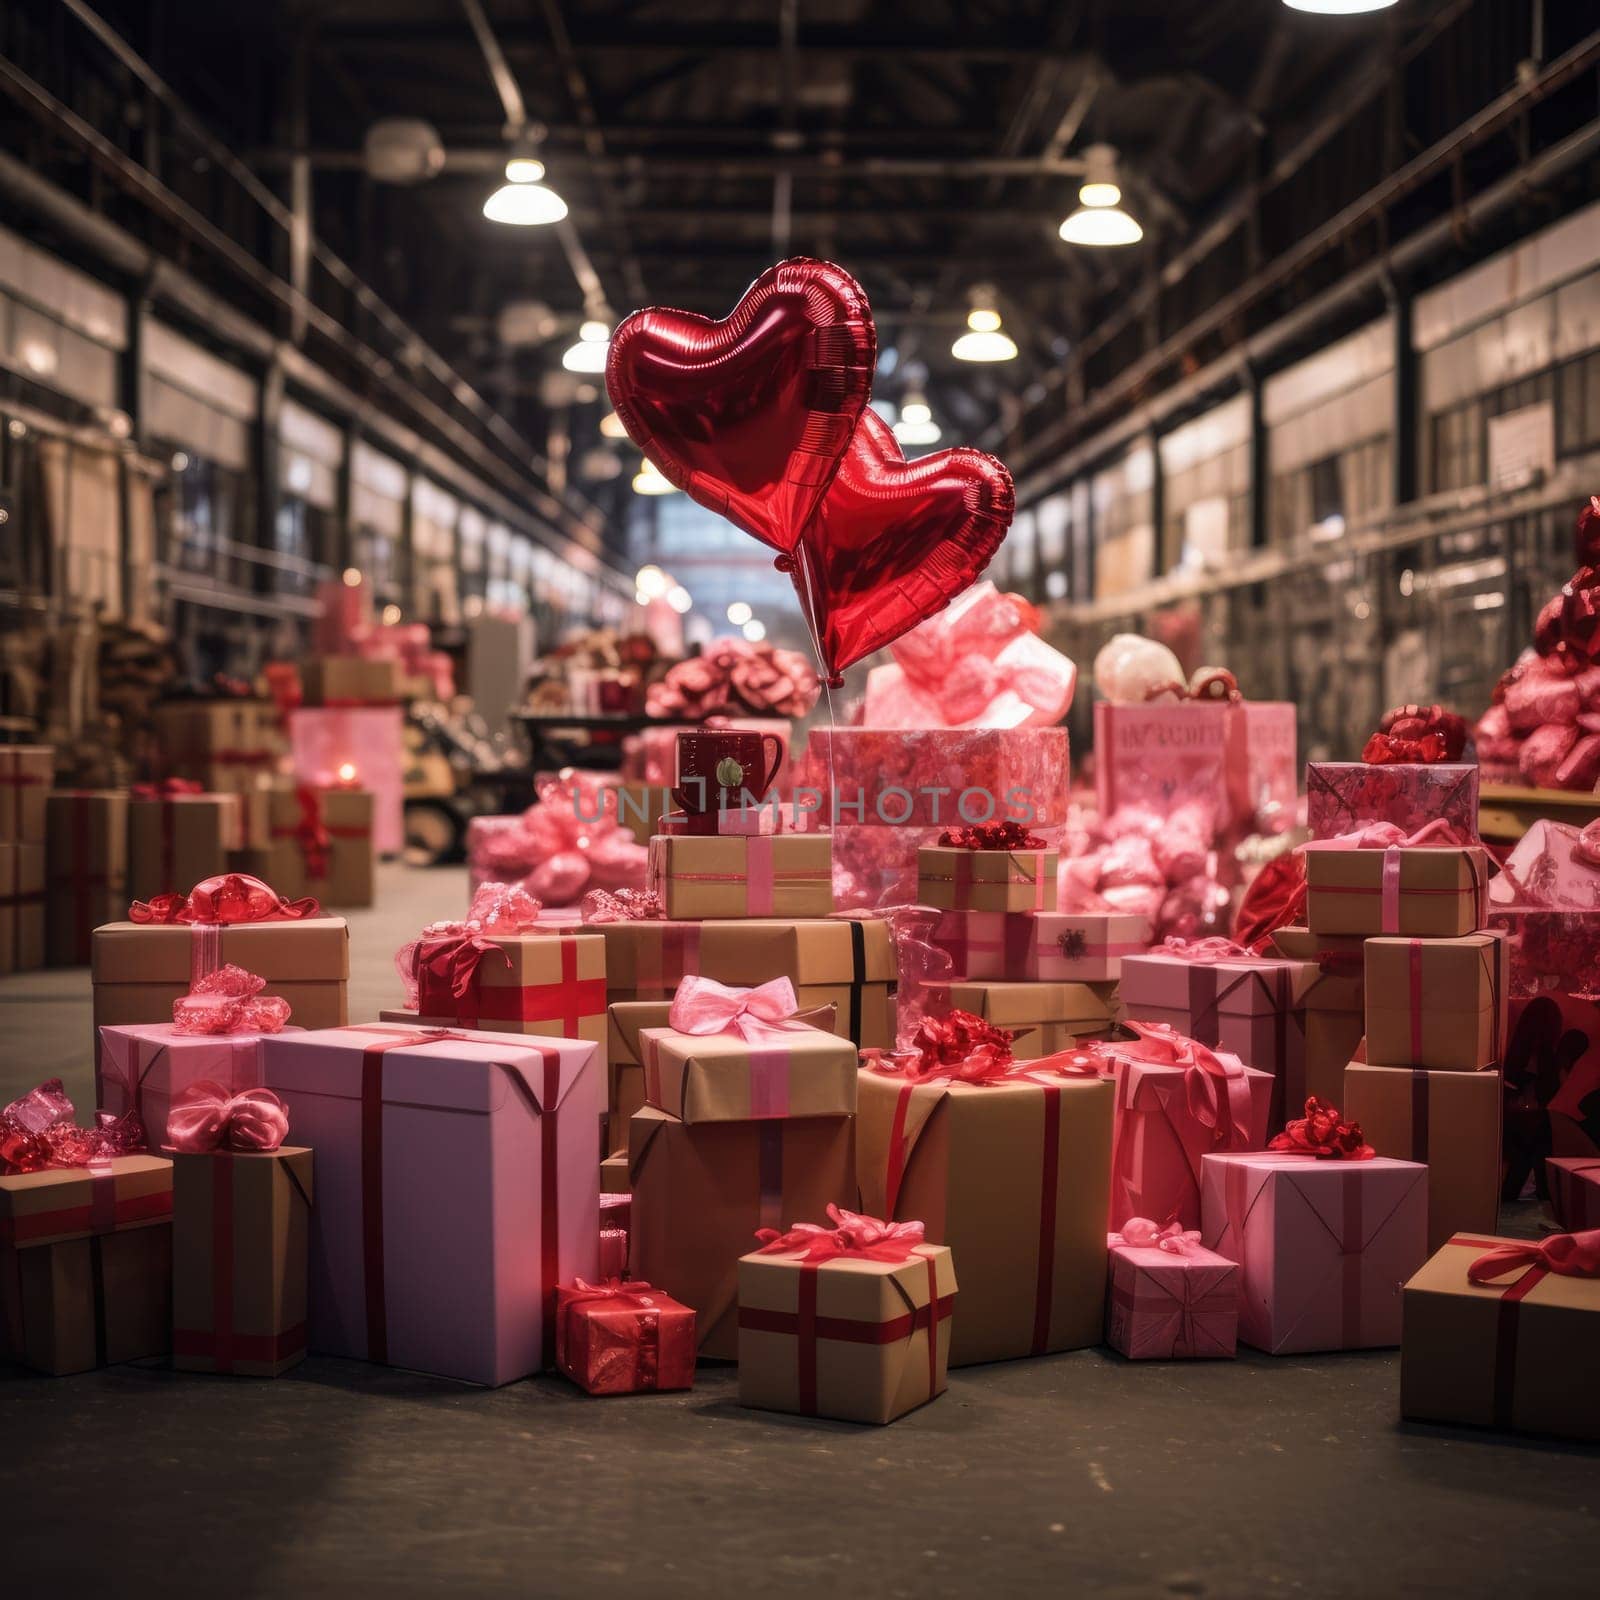 Large warehouse of Valentine's Day gifts. Sale and delivery of goods by natali_brill